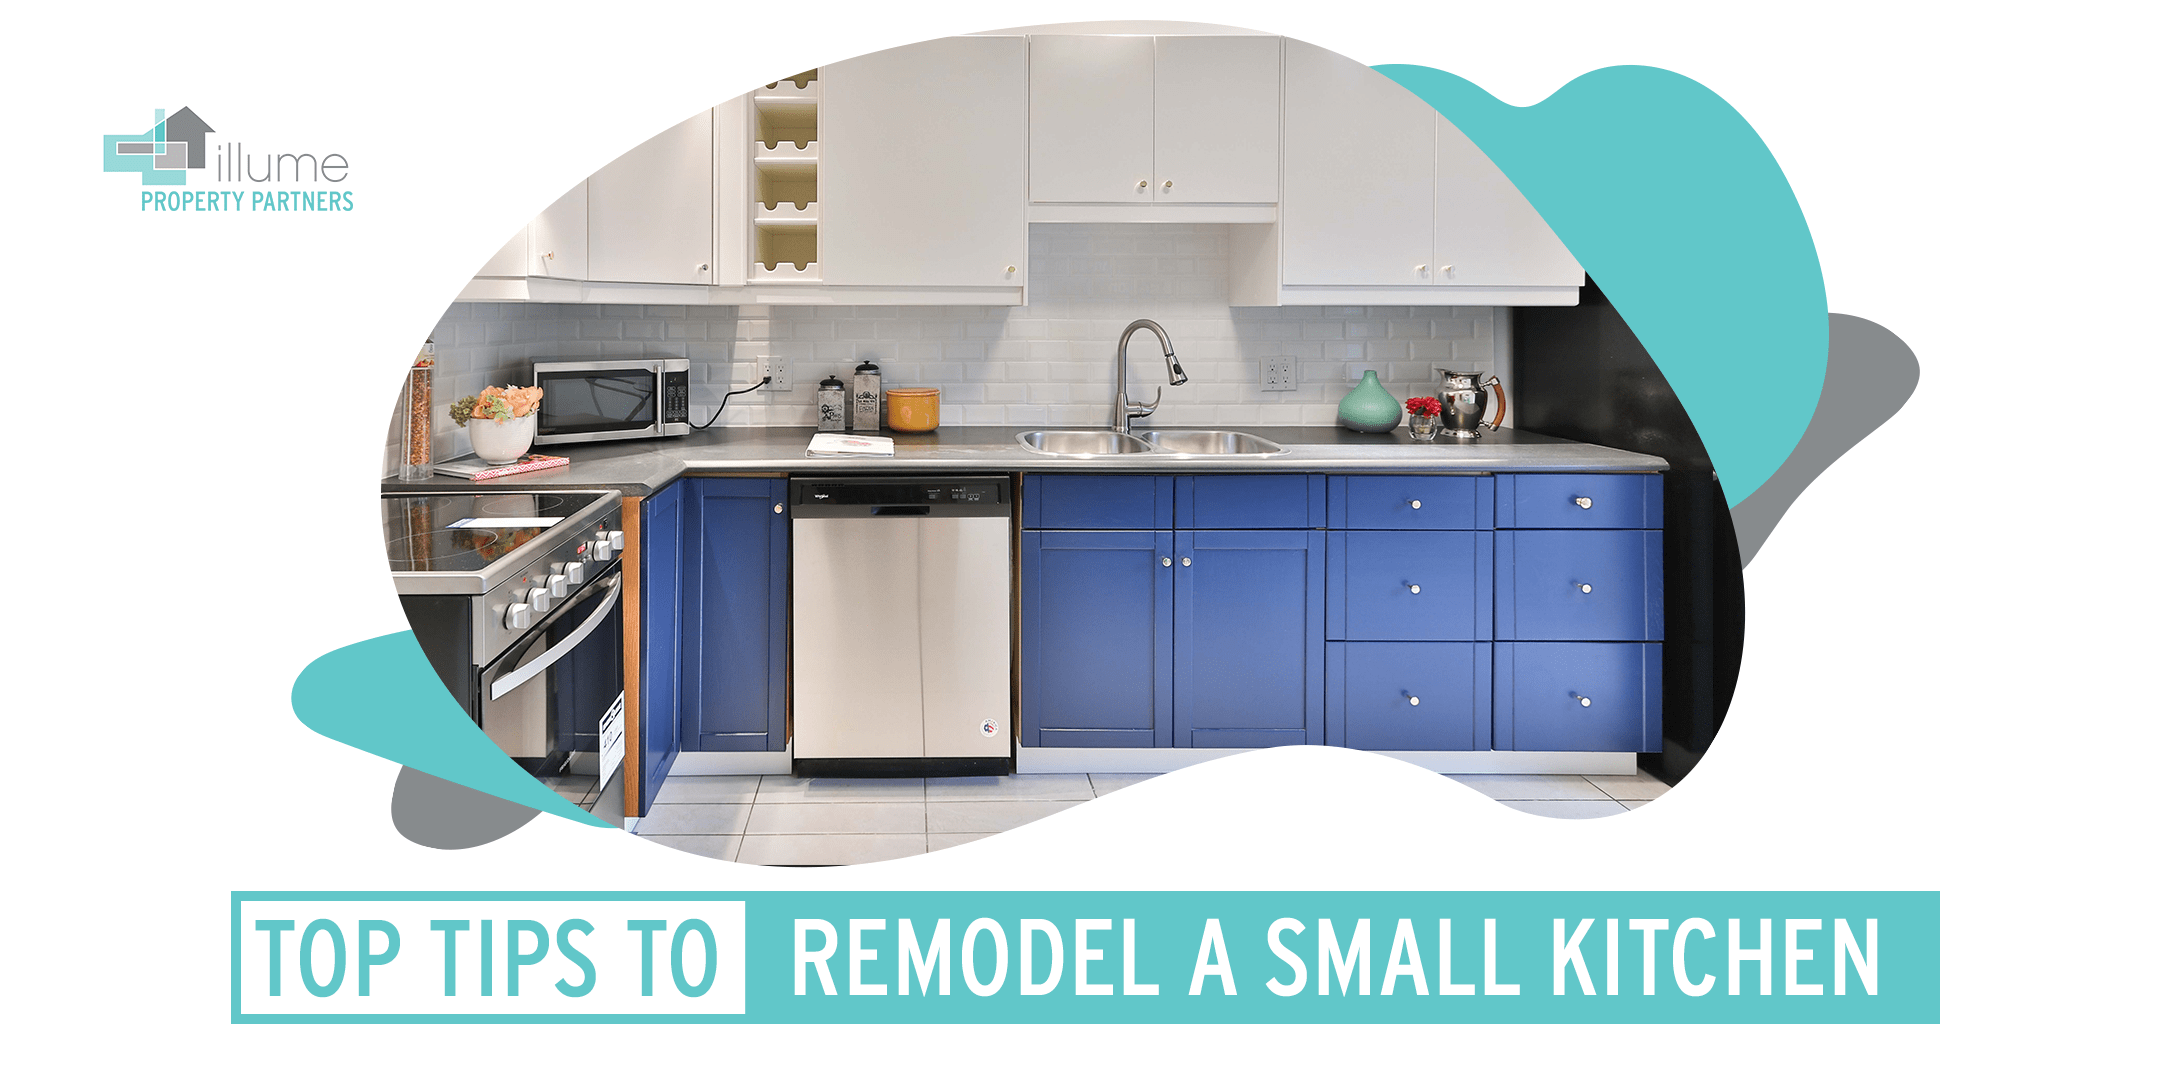 Top Tips on How to Remodel a Small Kitchen